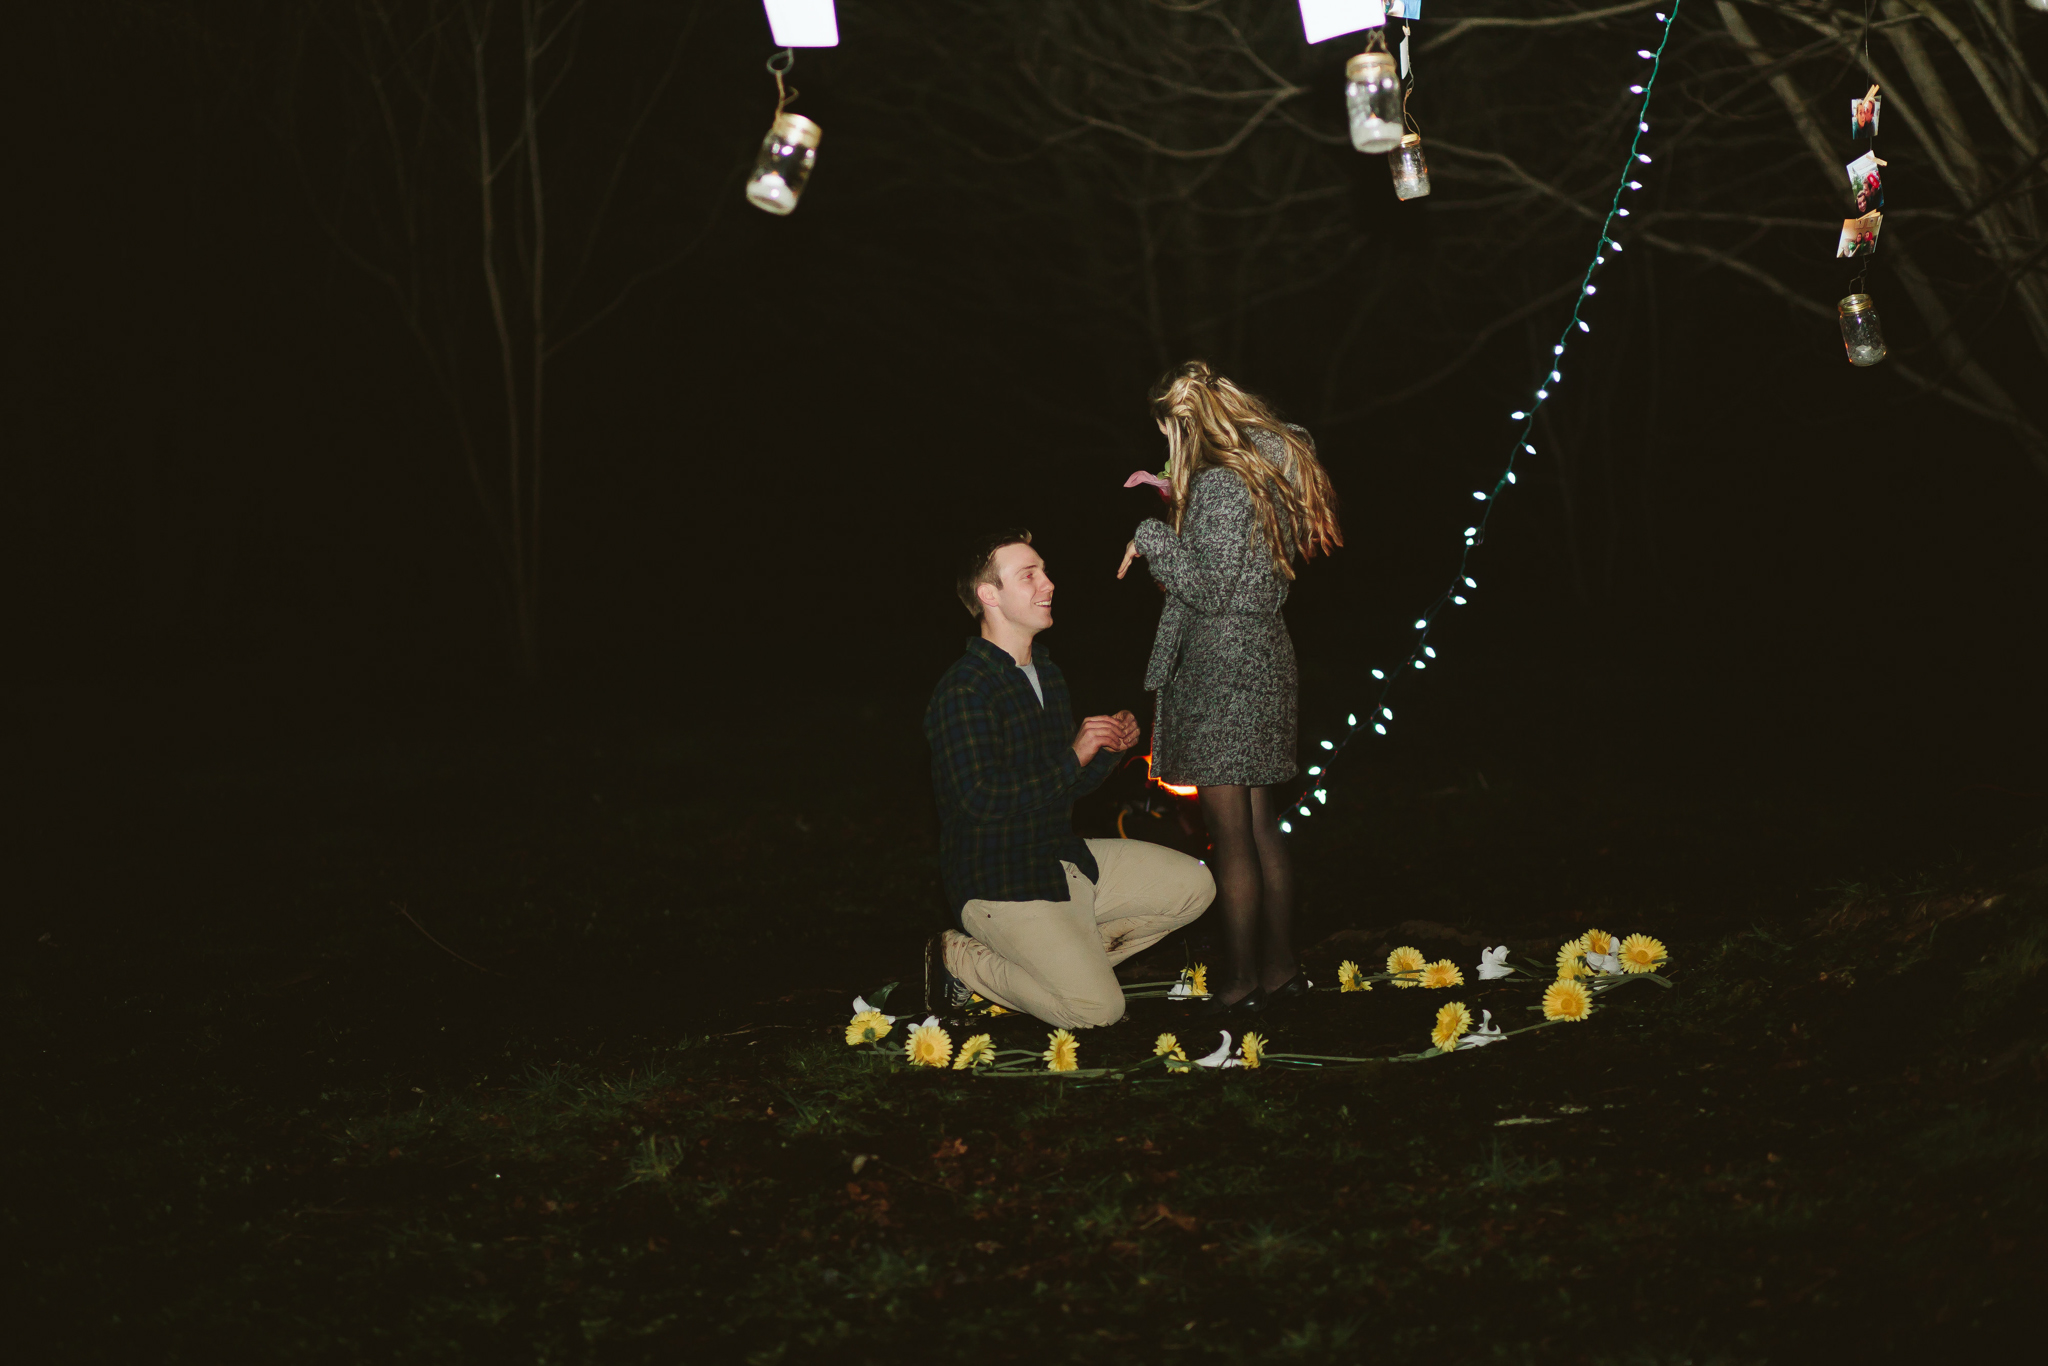 View More: http://michellekarstphotography.pass.us/timnaomiproposal